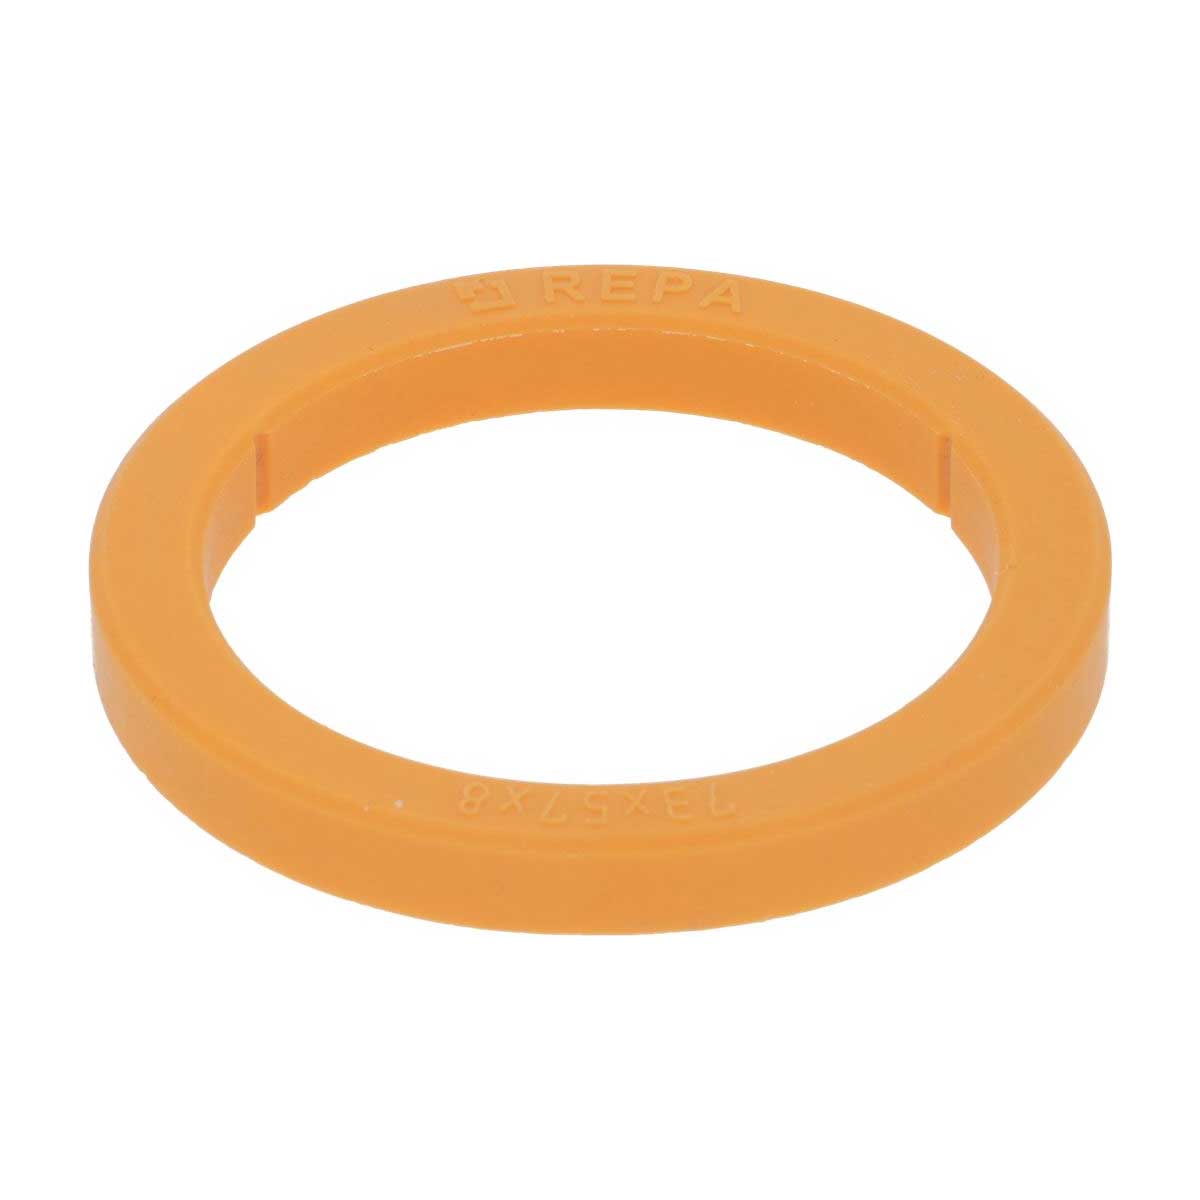 E61 Silicone Group Gaskets